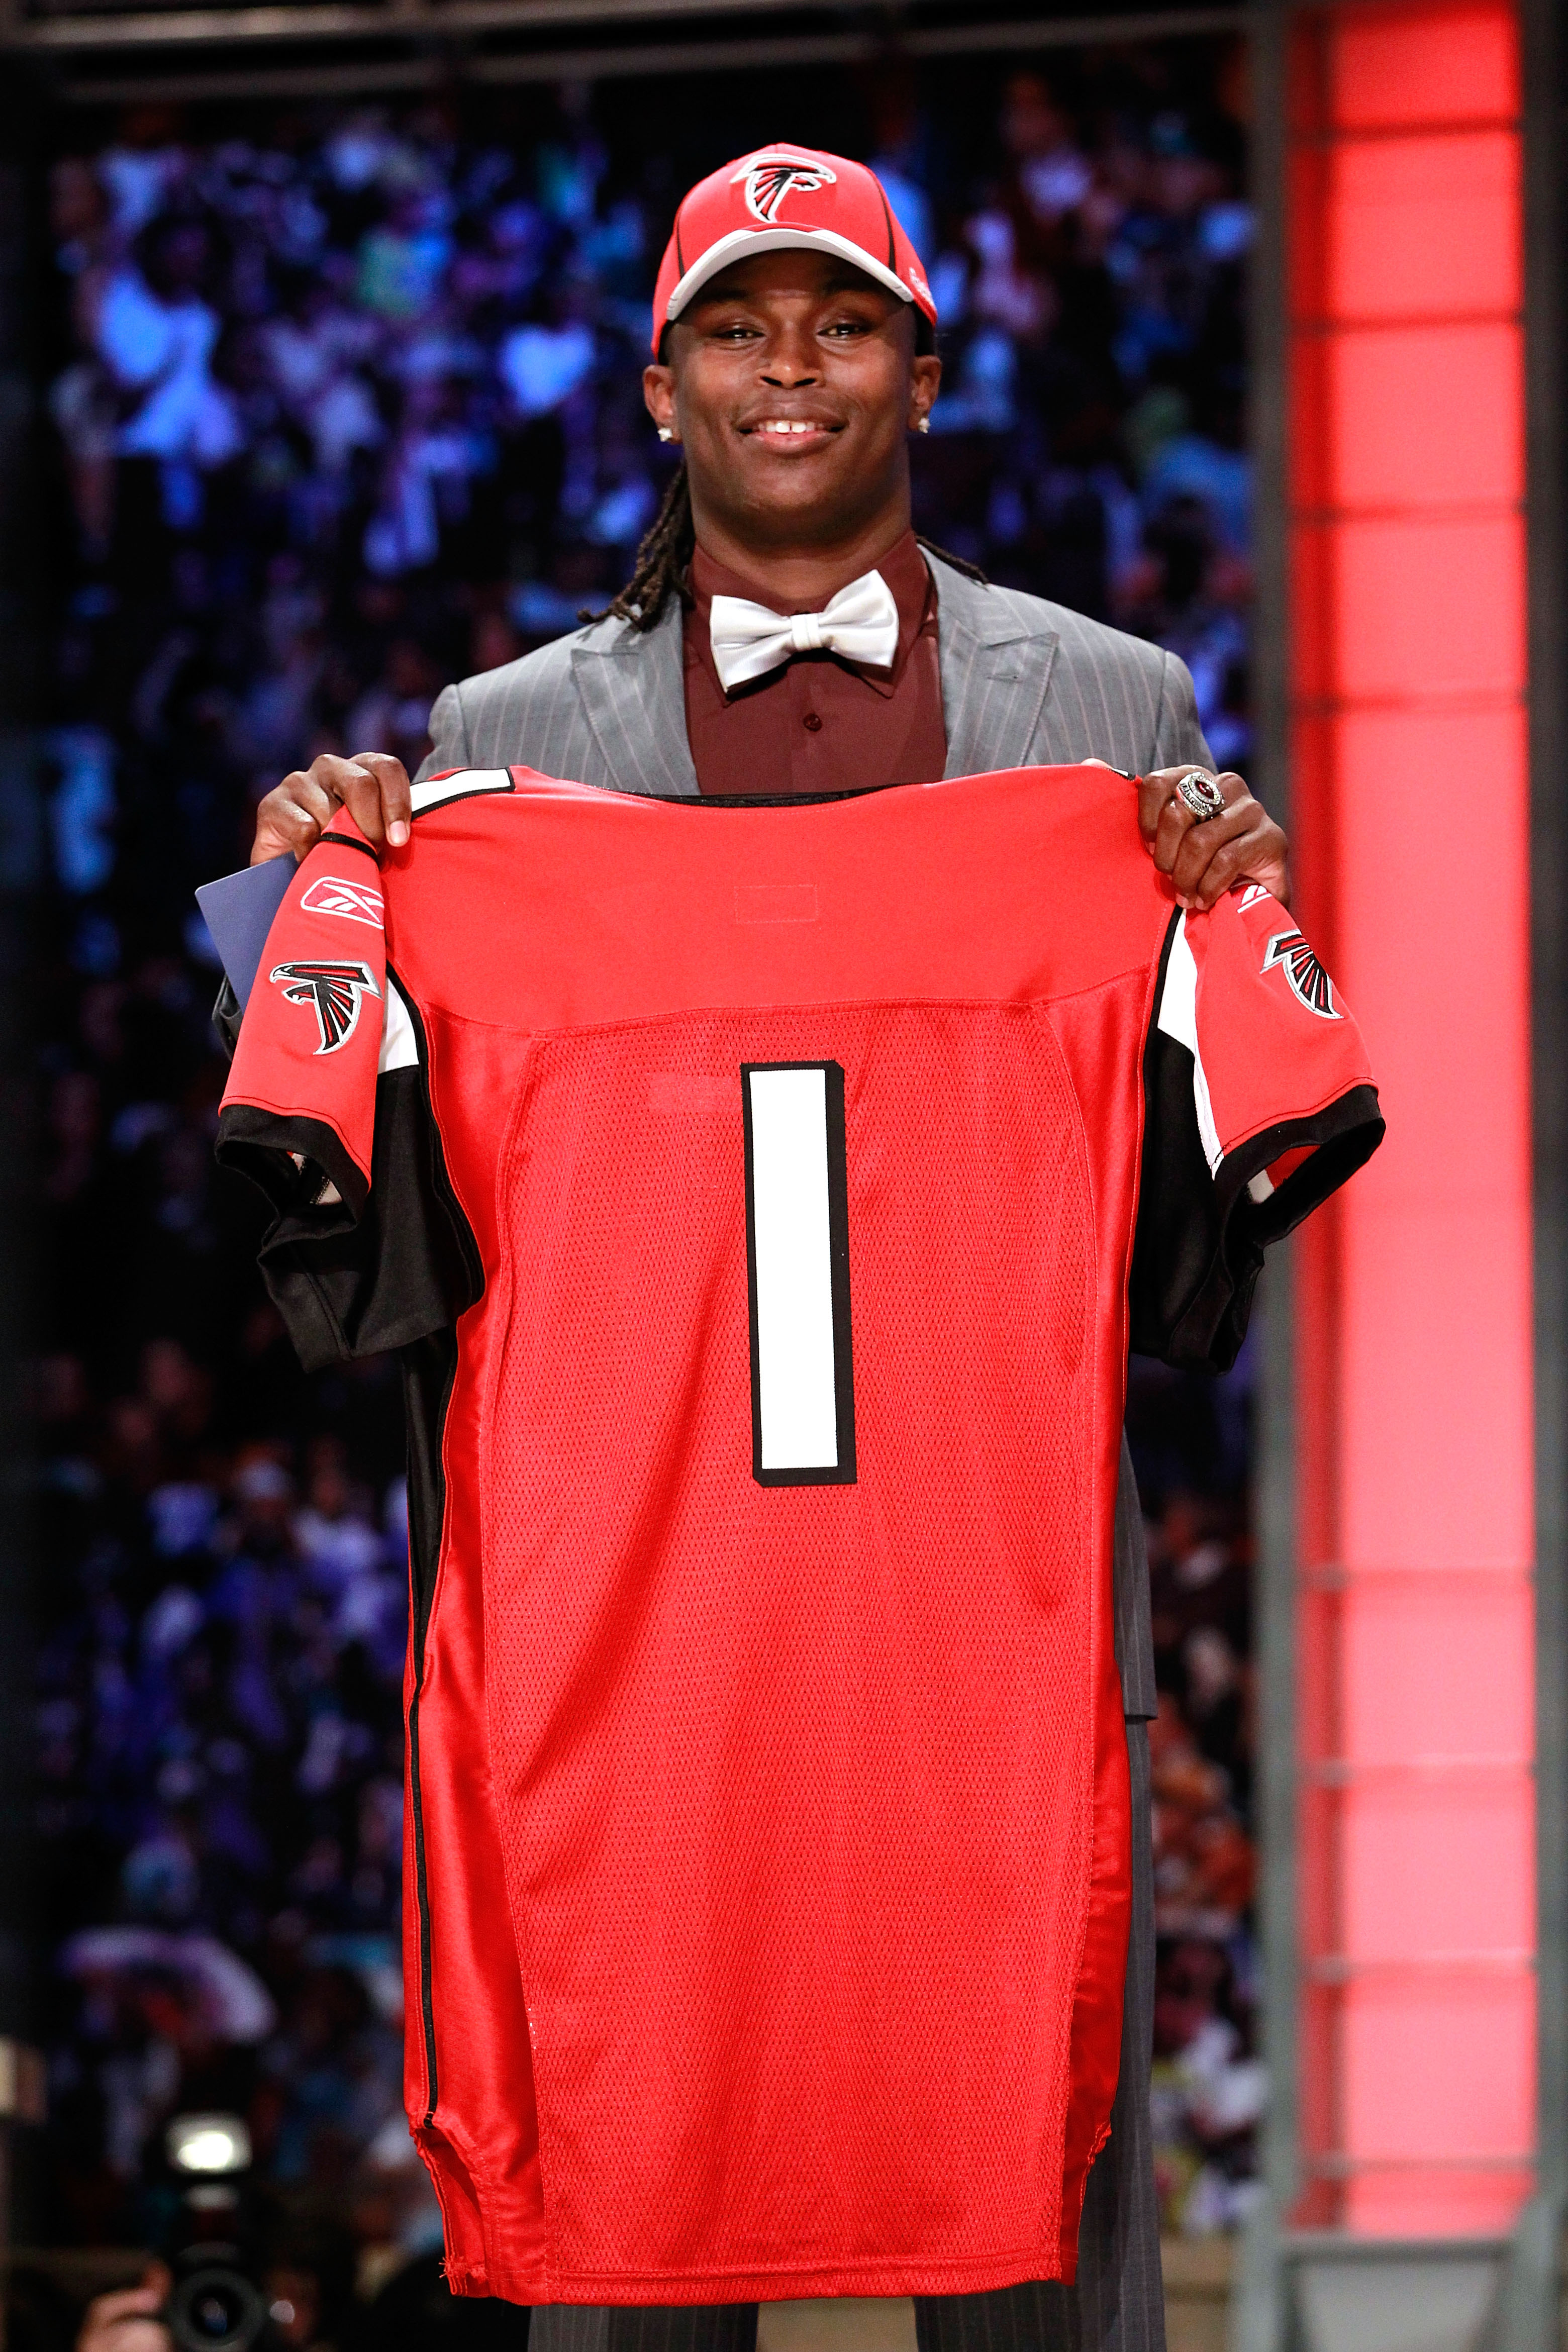 NEW YORK, NY - APRIL 28:  Julio Jones, #6 overall pick by the Atlanta Falcons, holds up a jersey on stage during the 2011 NFL Draft at Radio City Music Hall on April 28, 2011 in New York City.  (Photo by Chris Trotman/Getty Images)